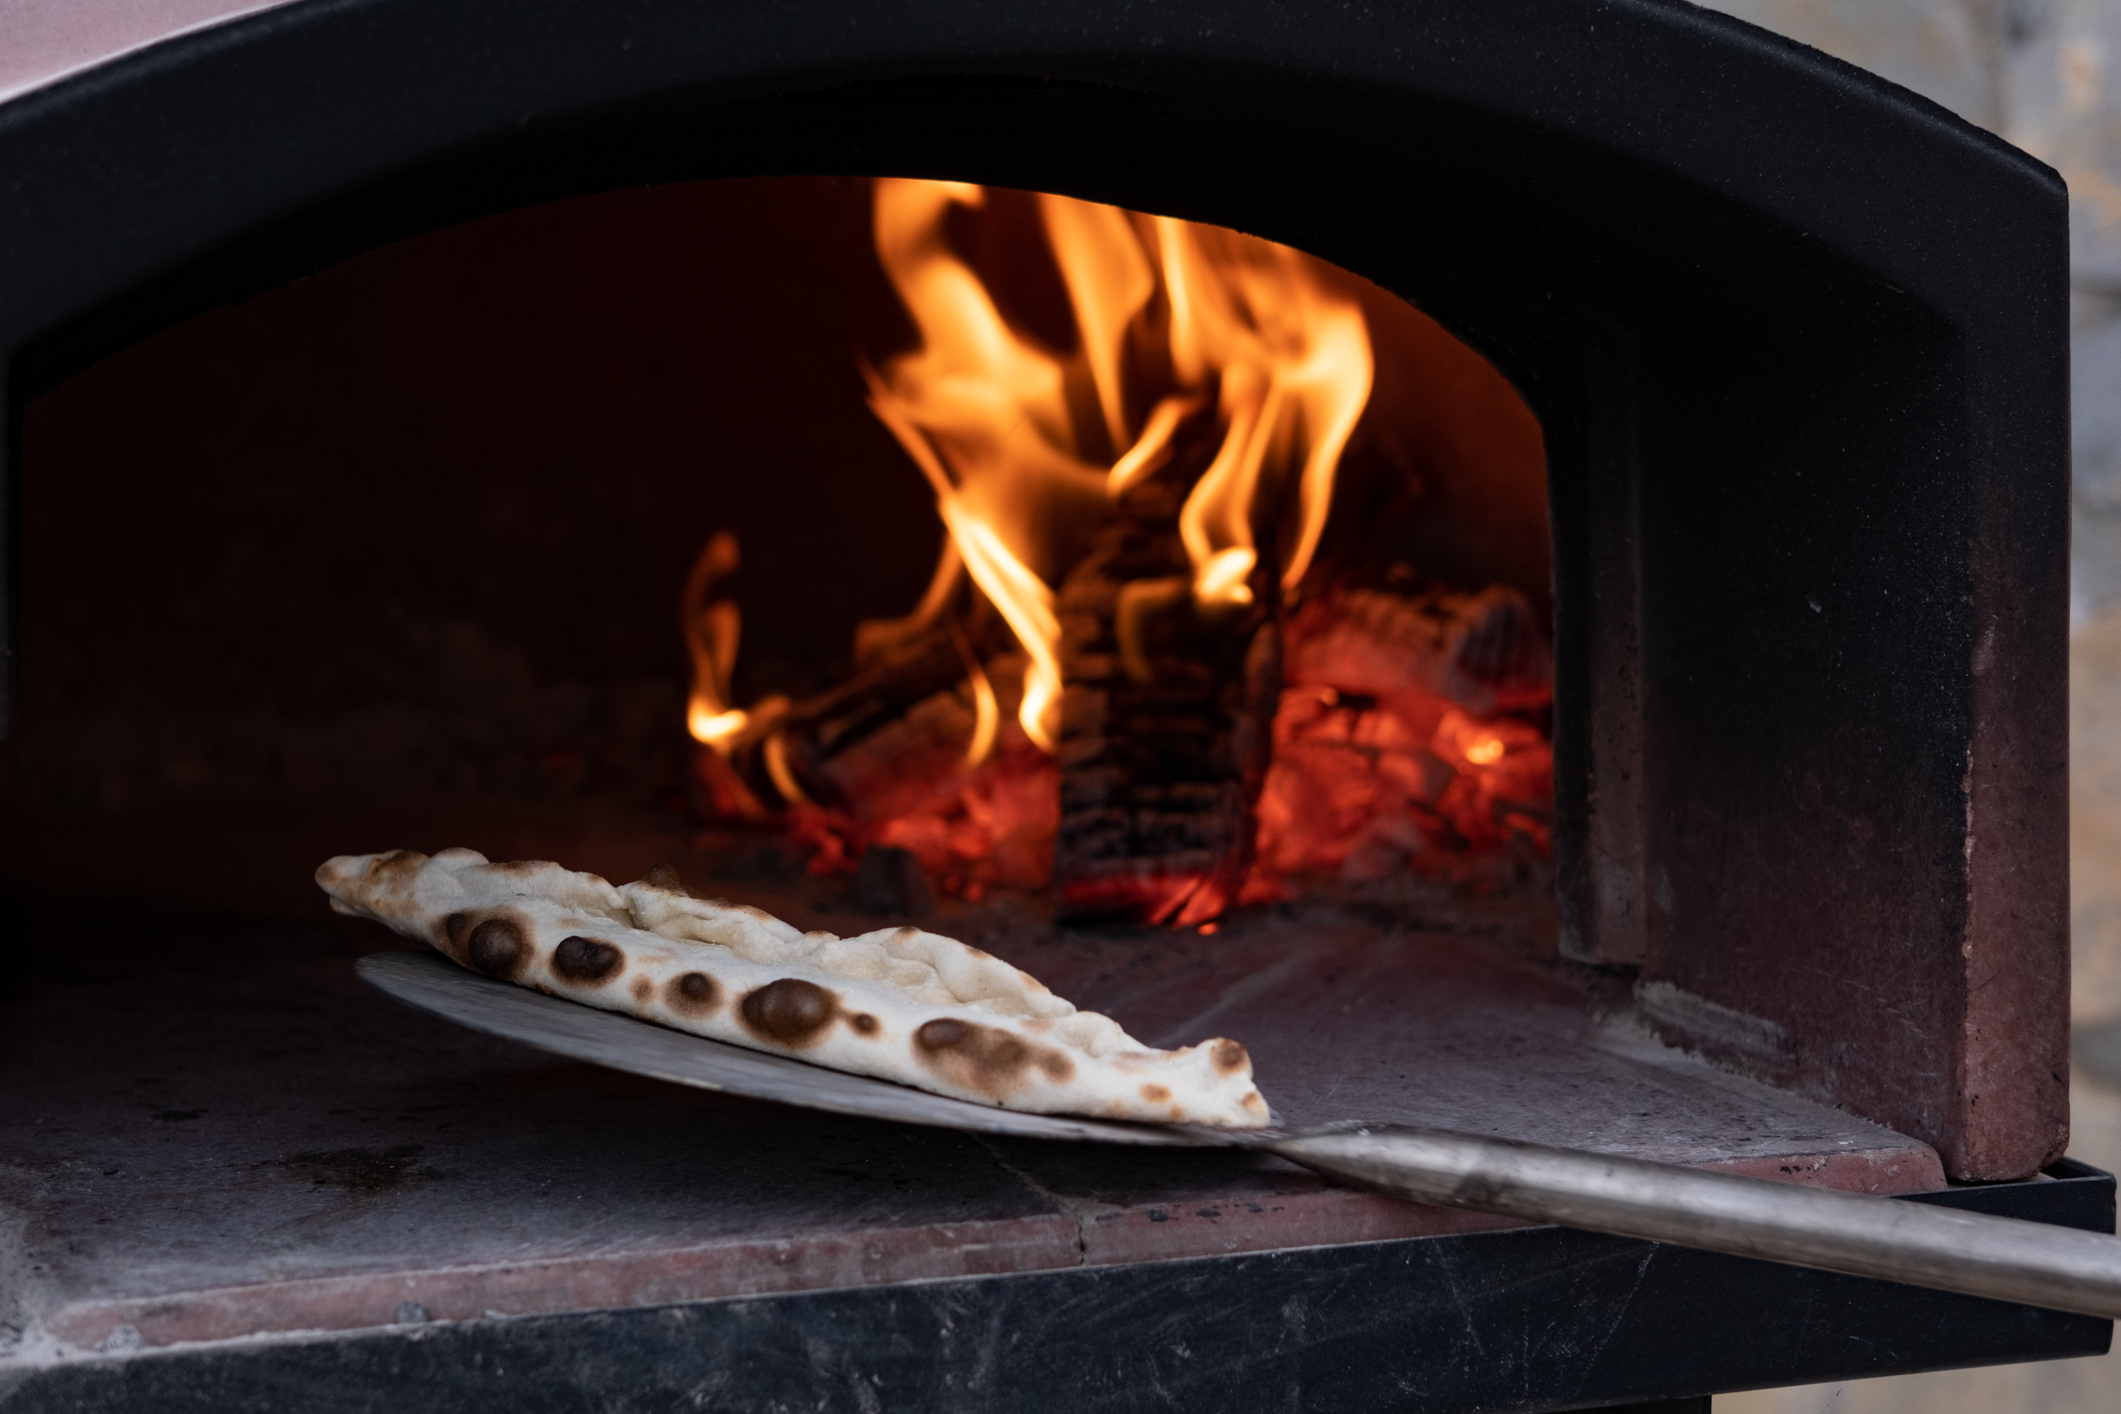 Pizza being cooked in a wood-fired oven with flames in the background